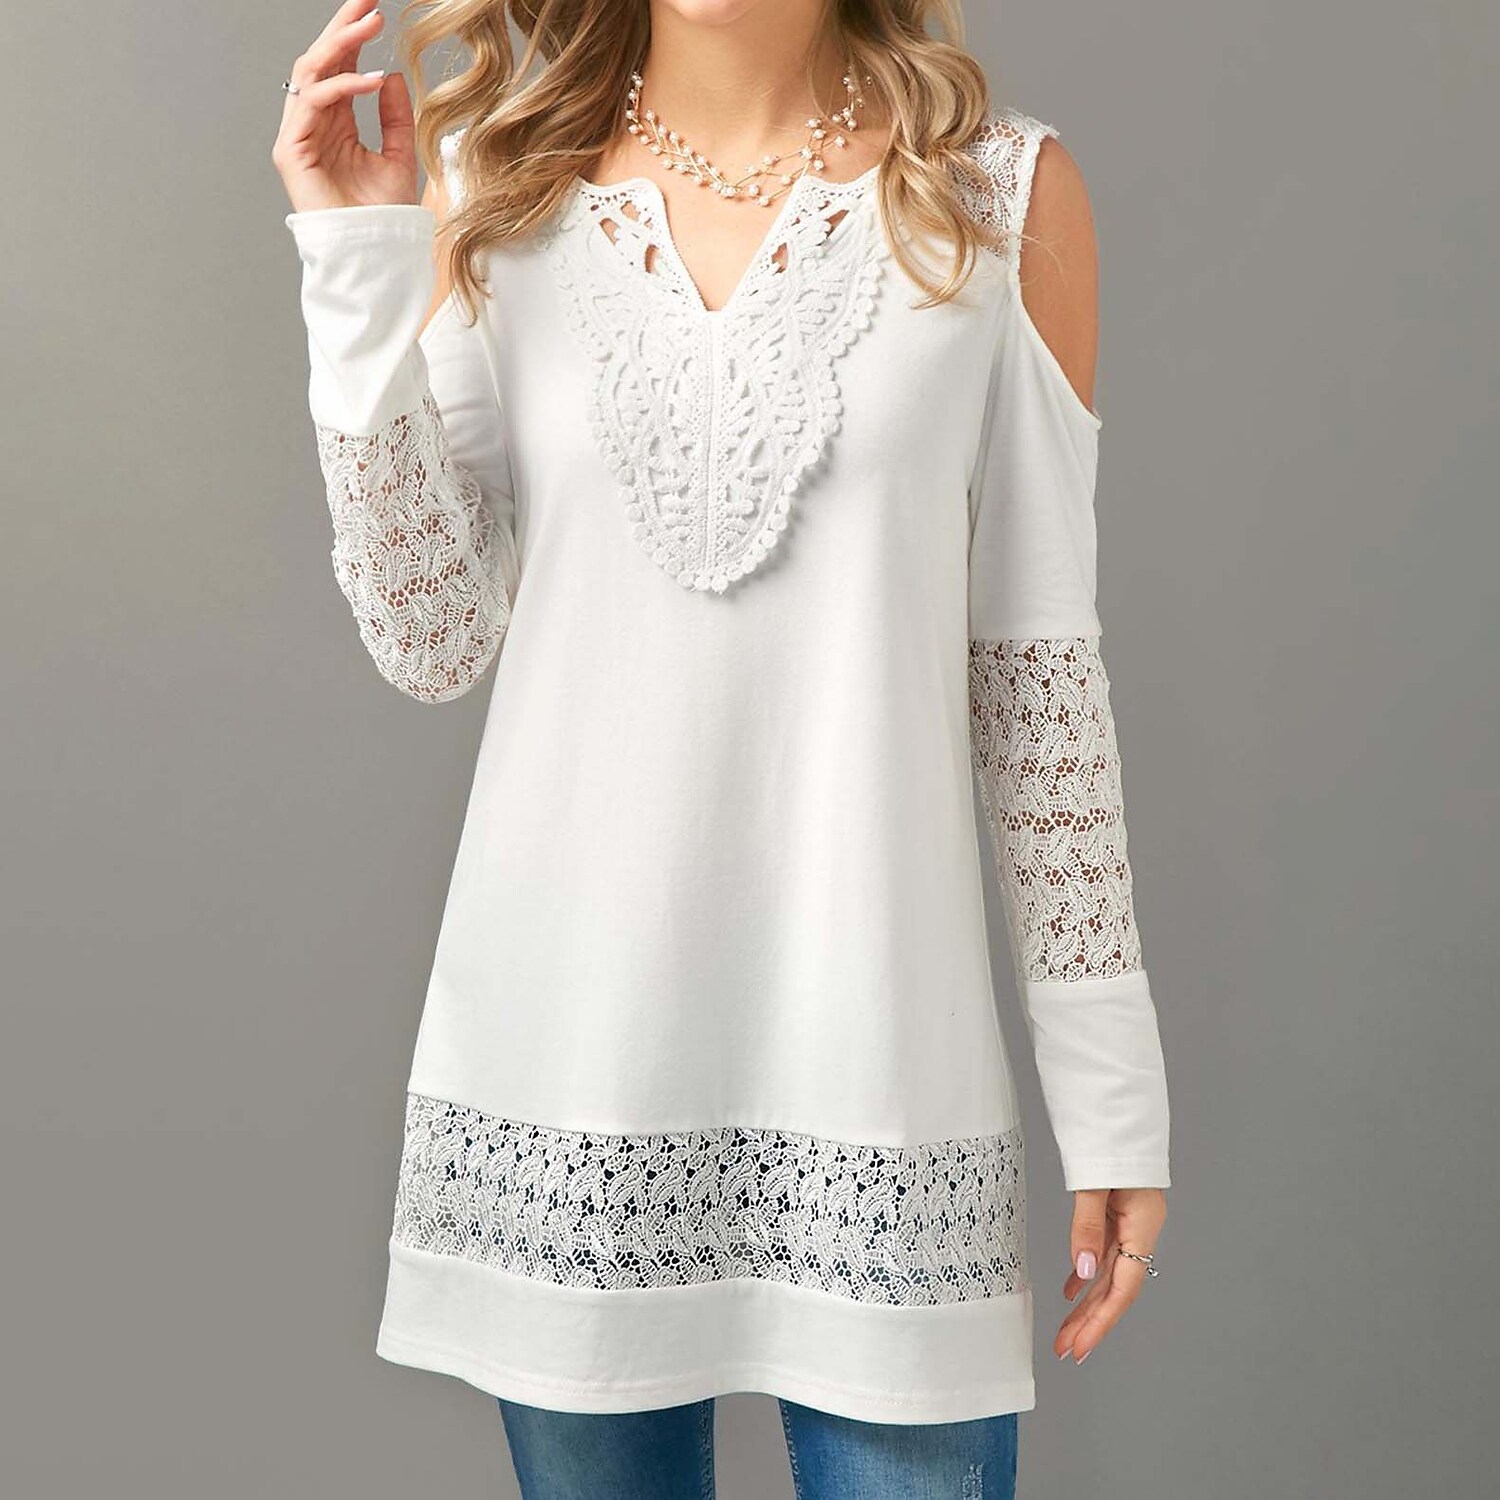 Women's butterfly lace off-the-shoulder top